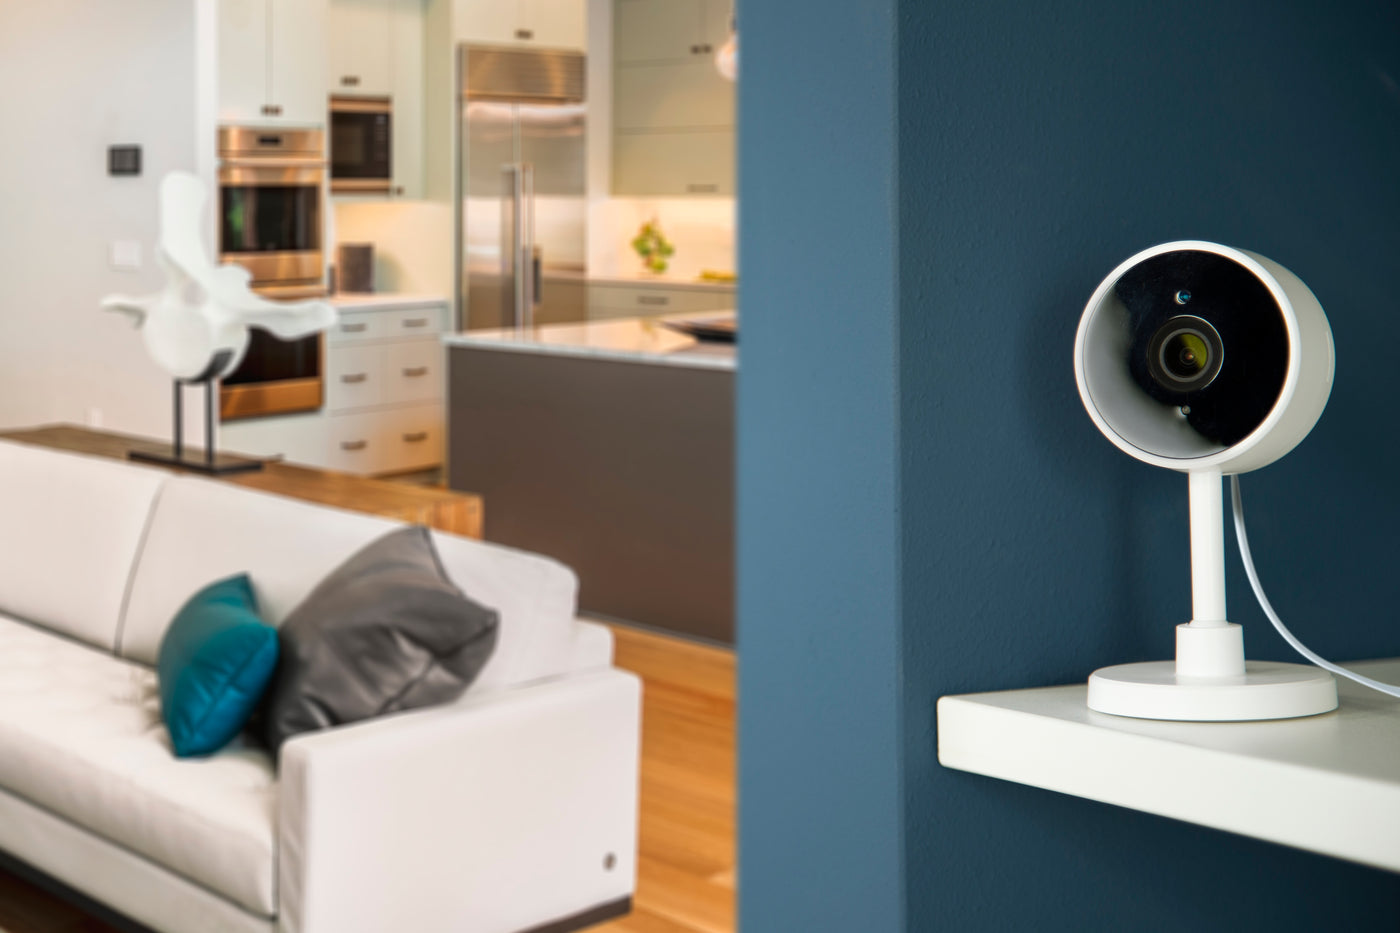 Alecto SMART-CAM10 - Smart wi-fi camera, IP camera suitable for home automation